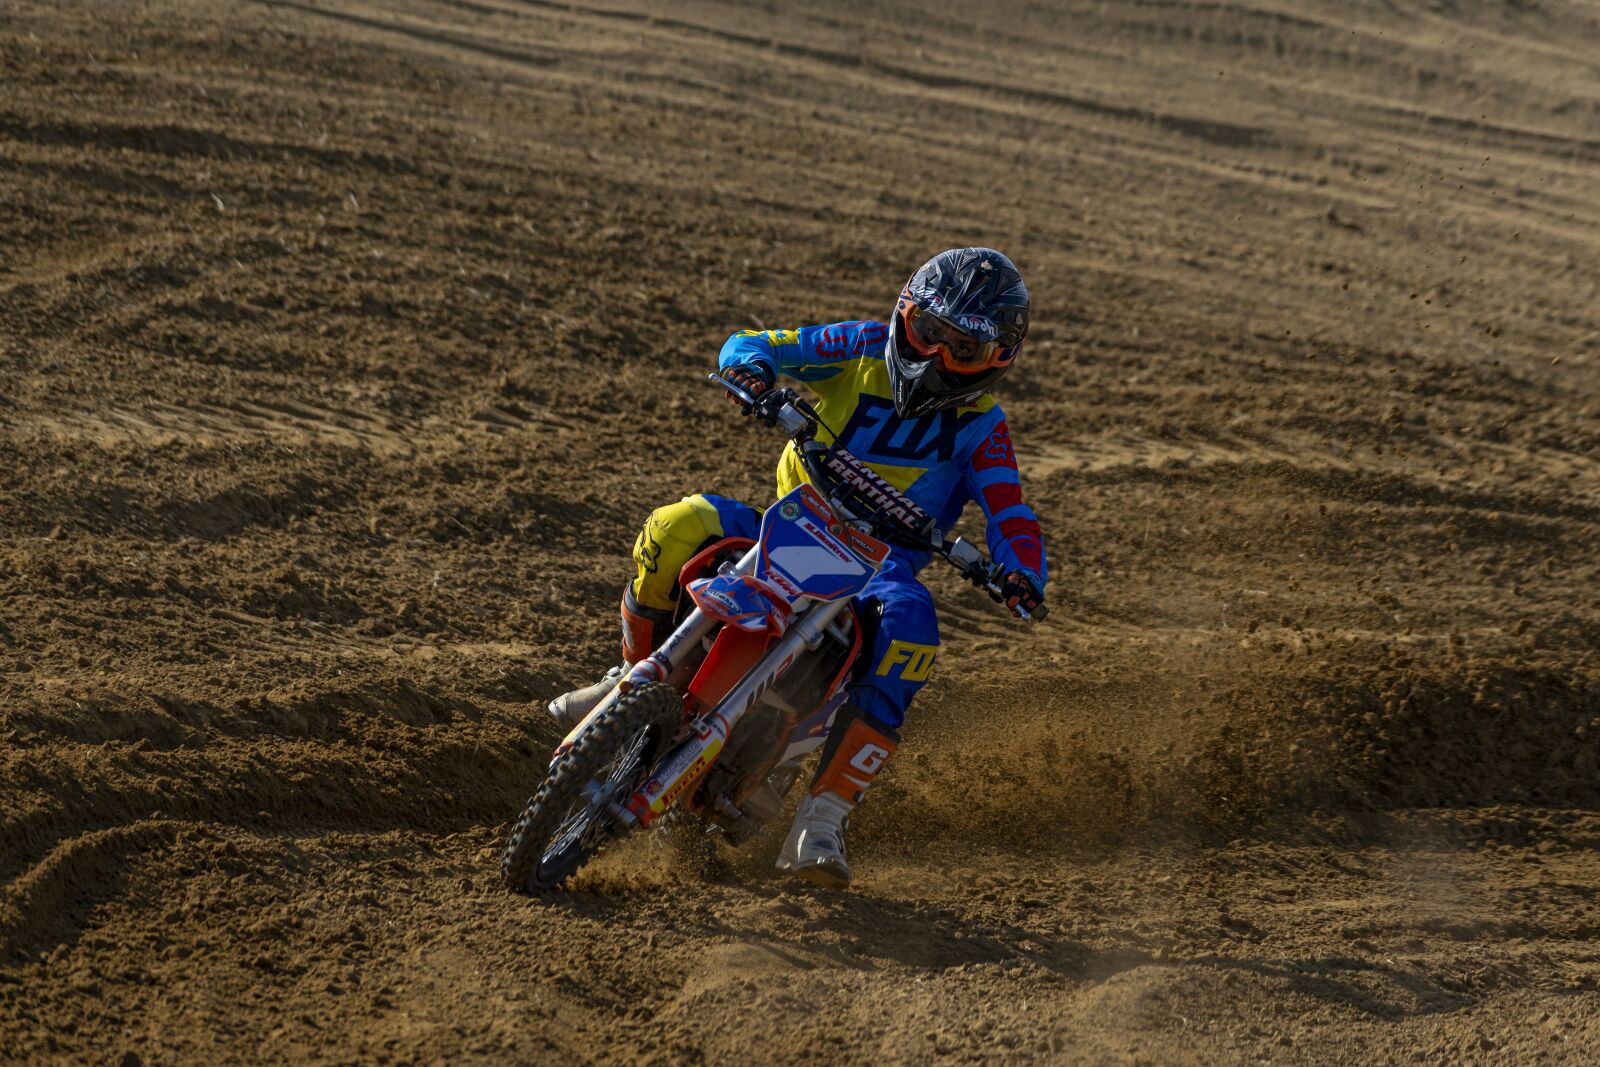 Sony a7 II + Sony FE 70-200mm F4 G OSS sample photo. Extreme, motorcross, motorcycle photography